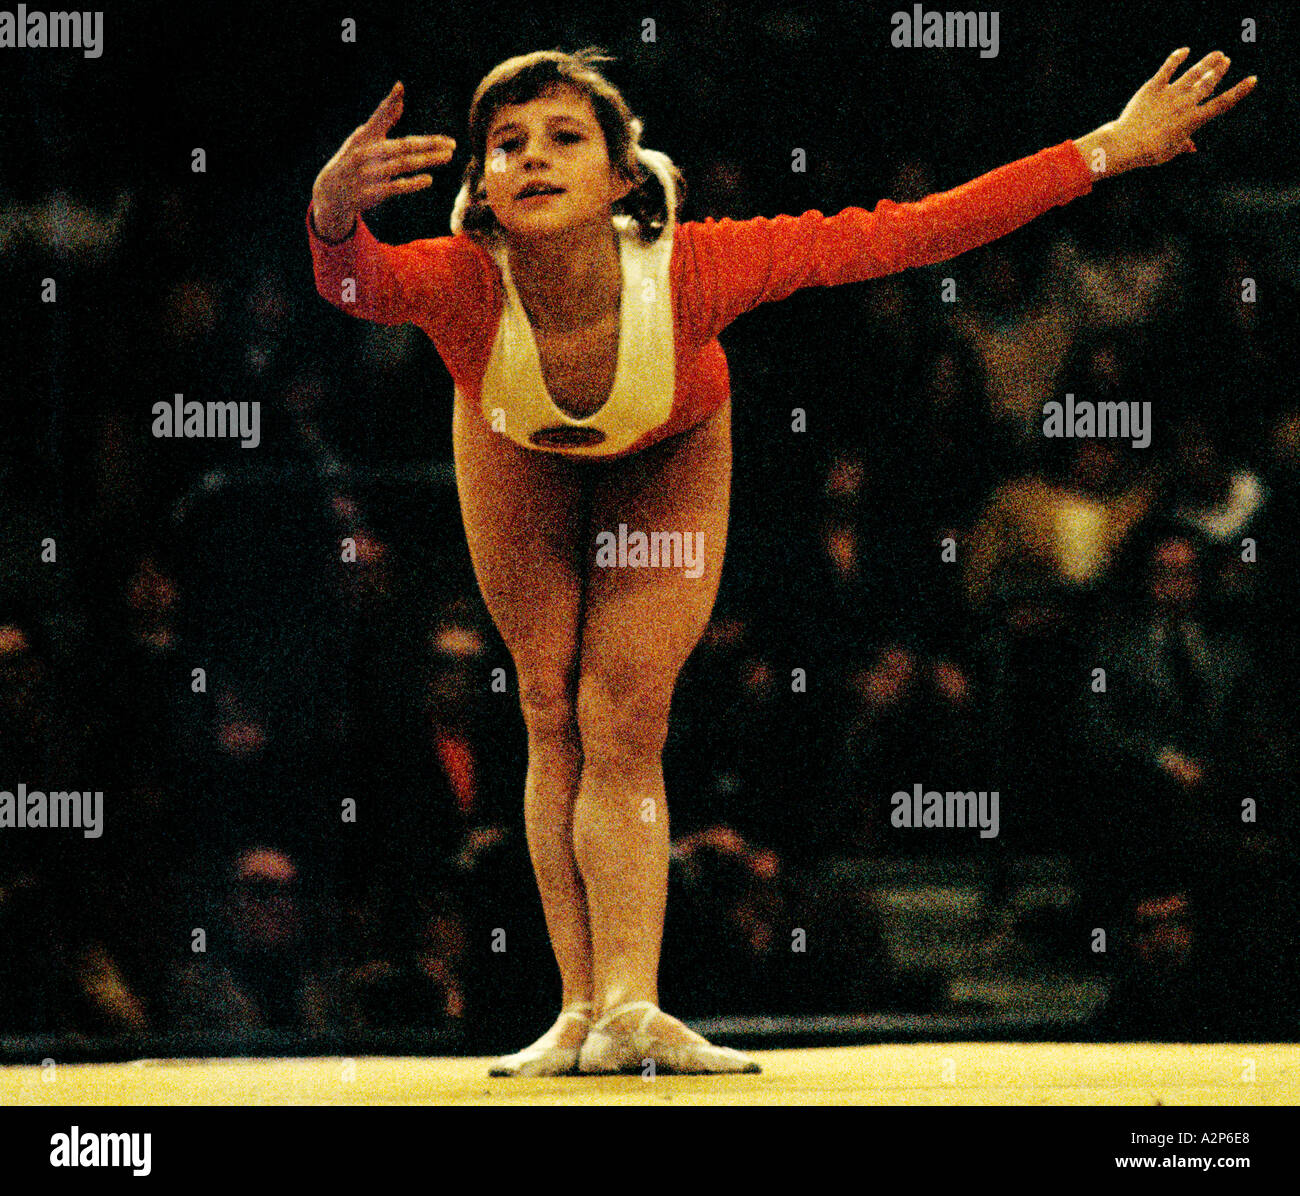 OLGA KORBUT RUSSIAN GYMNAST PHOTOGRAPHED IN 1975, LONDON  ON VERY HIGH SPEED FILM HENCE THE GRAIN Stock Photo